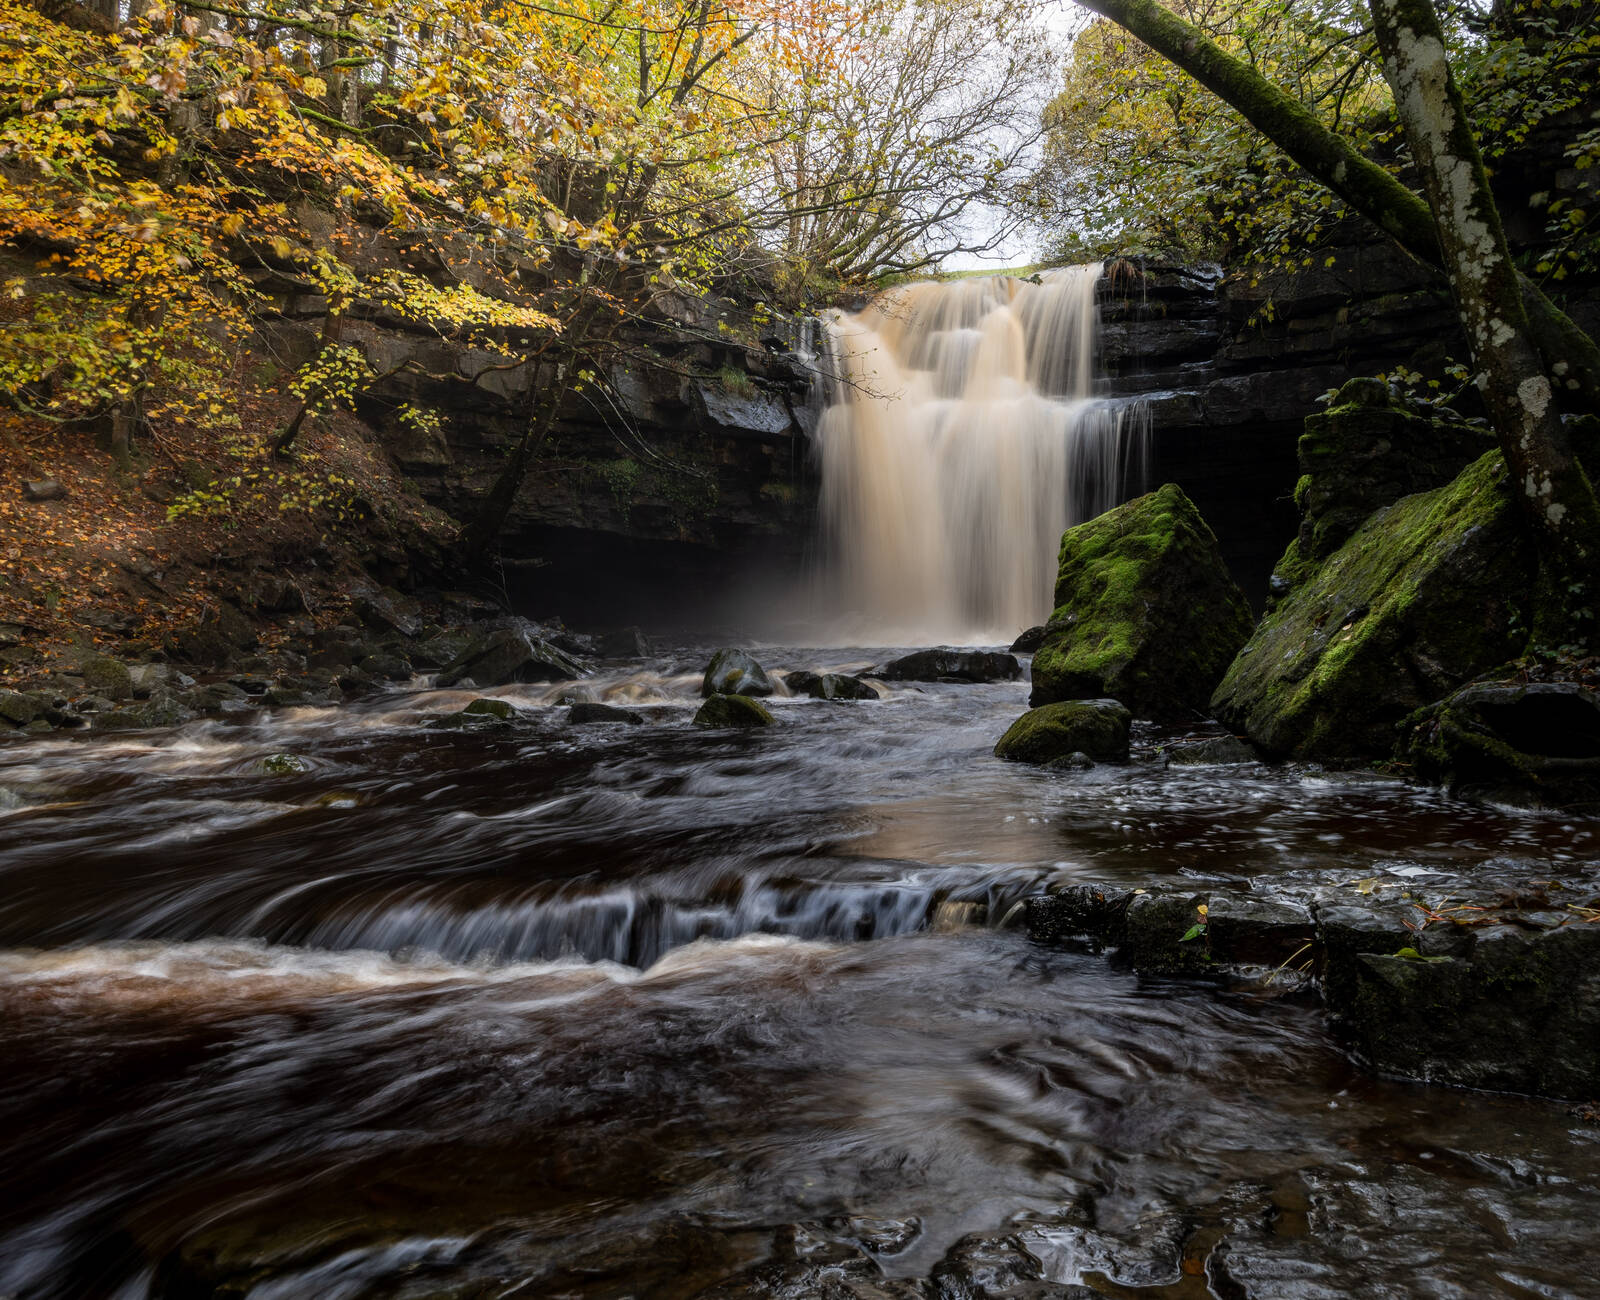 Image of Summerhill Force Waterfall by Paul Gaskell